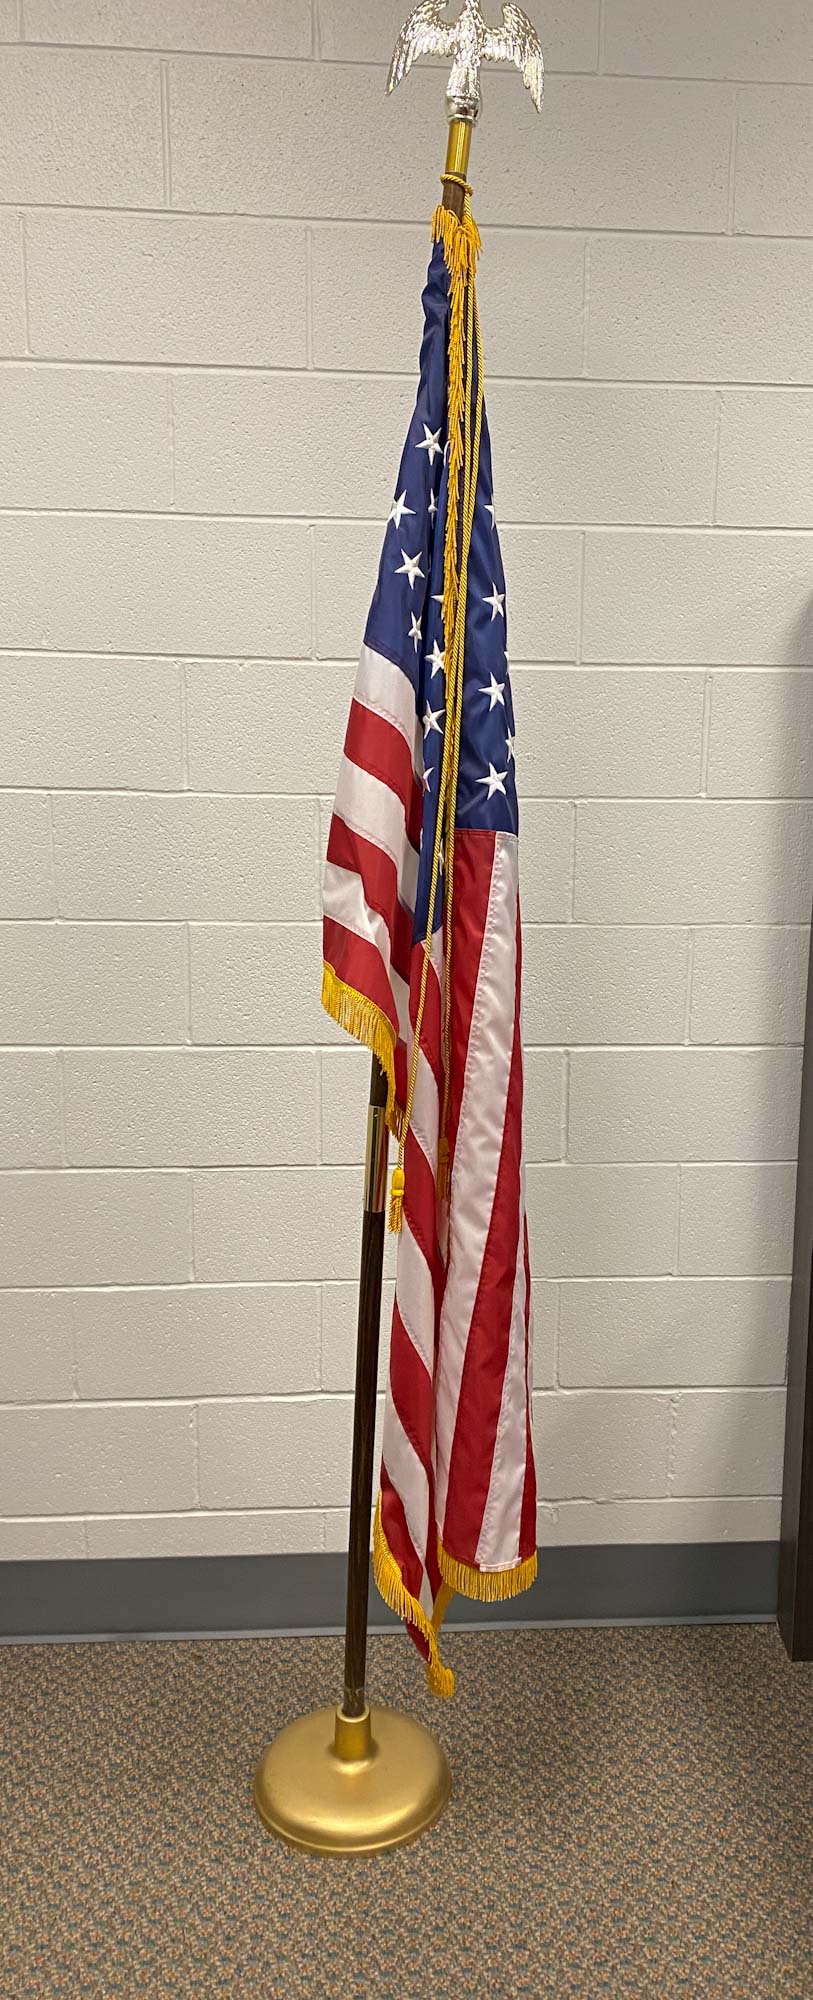 image of indoor american flag on a flagpole